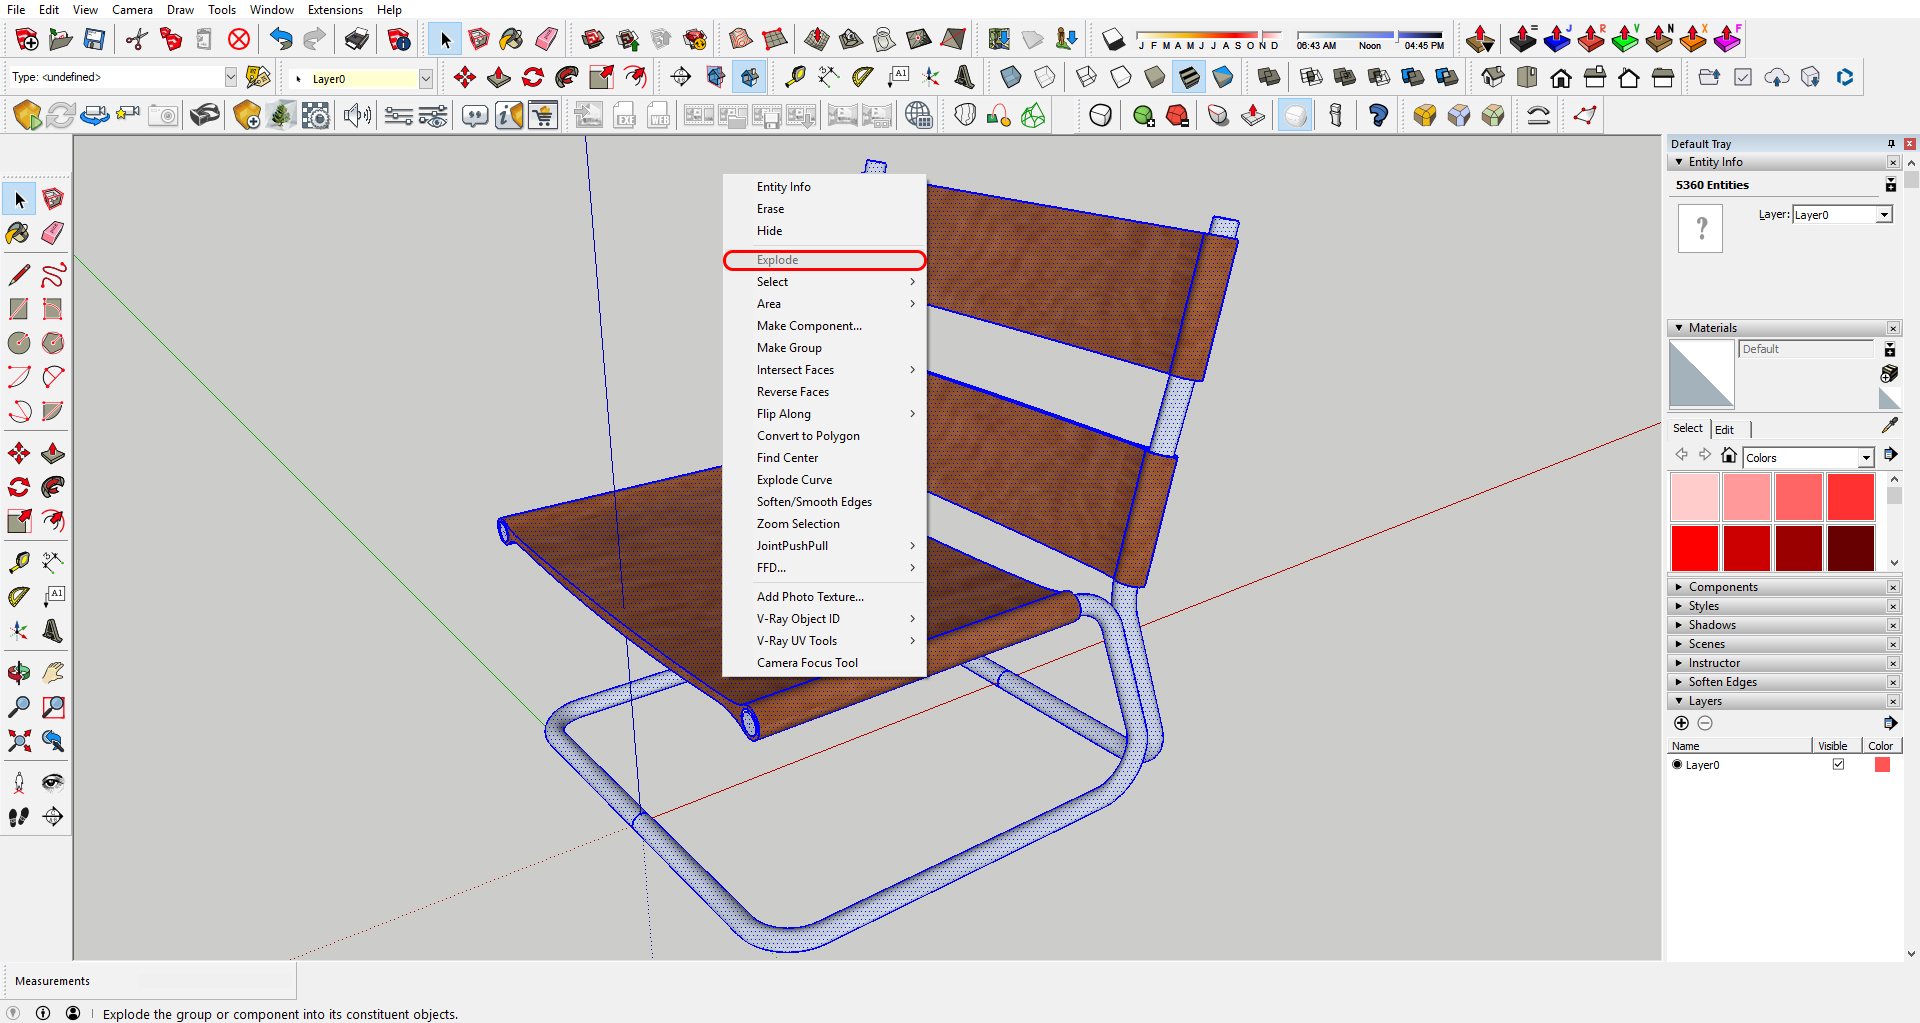 This image indicates how to explode the Sketchup model